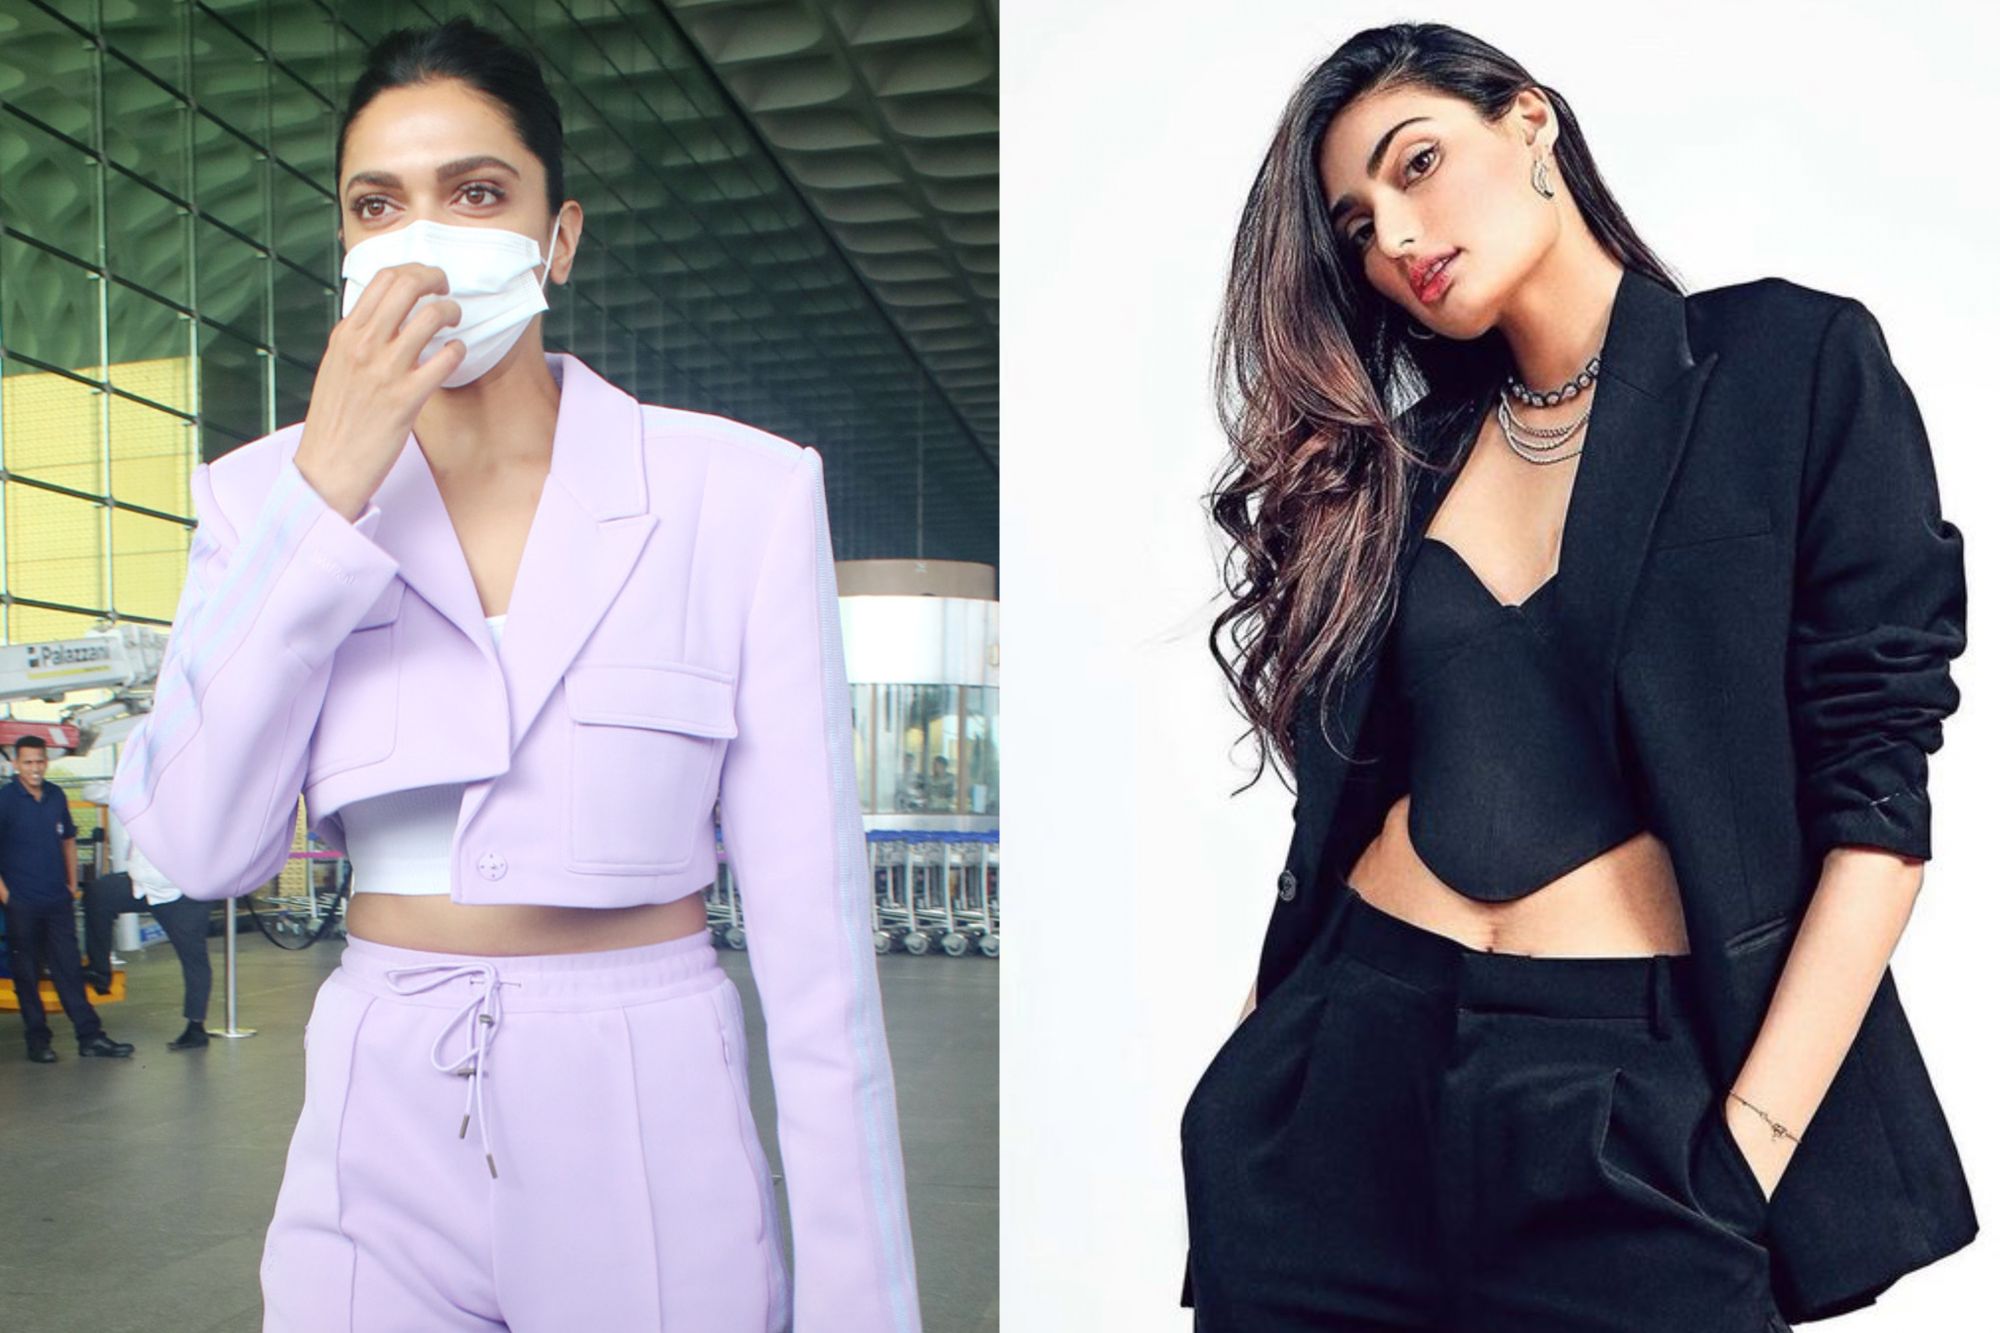 Pantsuits For The Win! Deepika Padukone And Athiya Shetty Give Off Girl Boss Vibes In Their OOTD’s